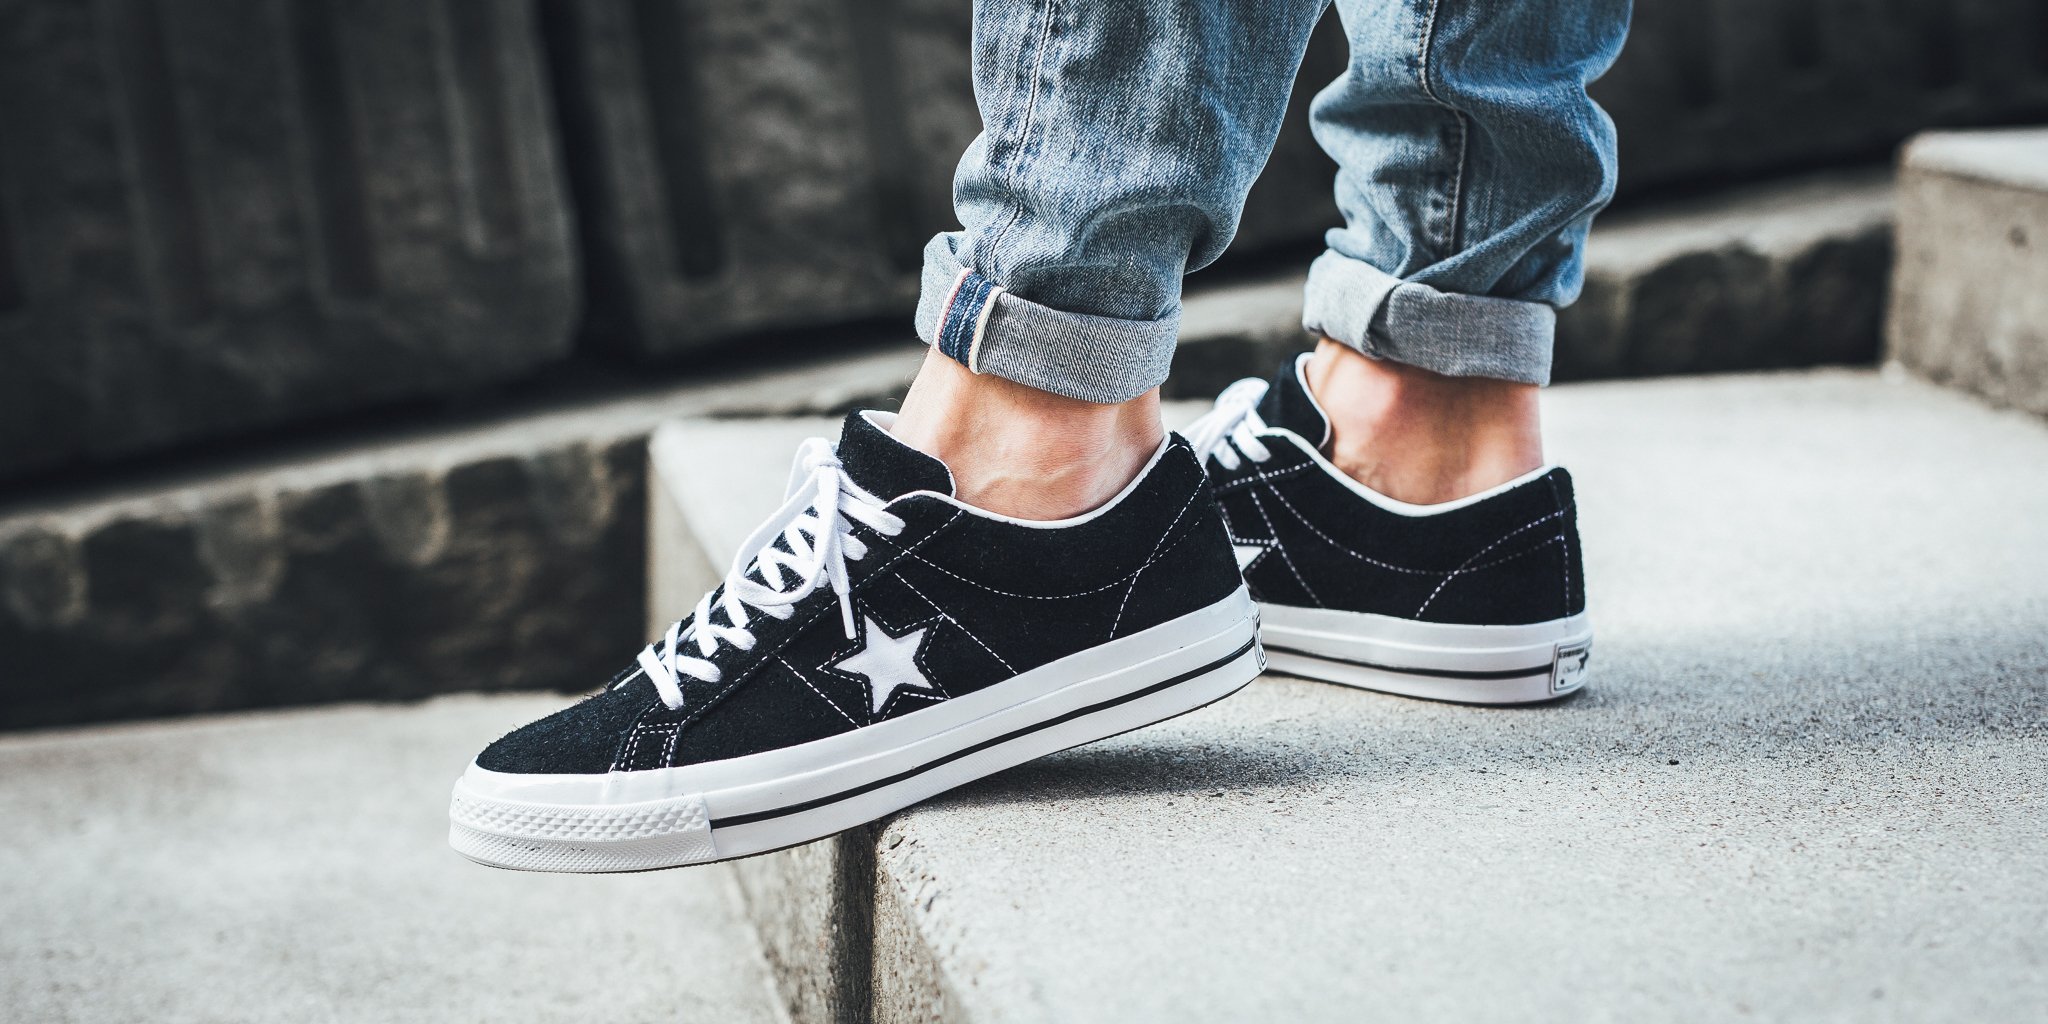 bijtend Bekwaam Scheermes Titolo on Twitter: "Don't hesitate to check our #SALE! 😎🕐🏁 Converse One  Star Premium Suede Low Top - Black/White-White shop NOW 👉🏻  https://t.co/yLwXPSGCVb #sale #sales #sneakers #nike #adidas #puma #reebok  #asics #vans #